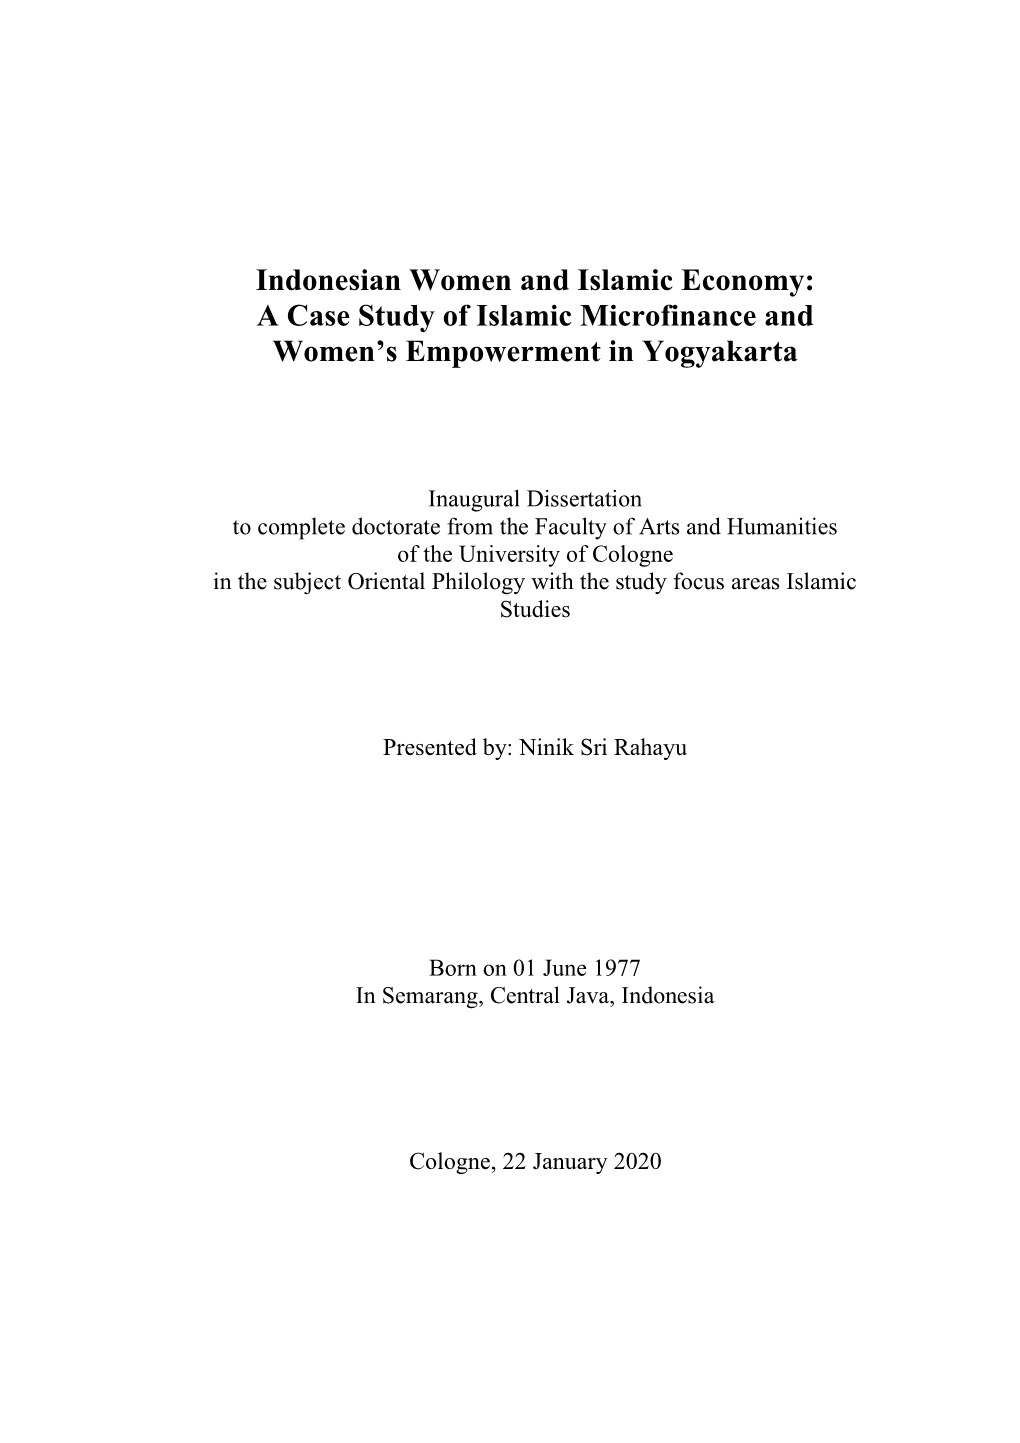 A Case Study of Islamic Microfinance and Women's Empowerment In